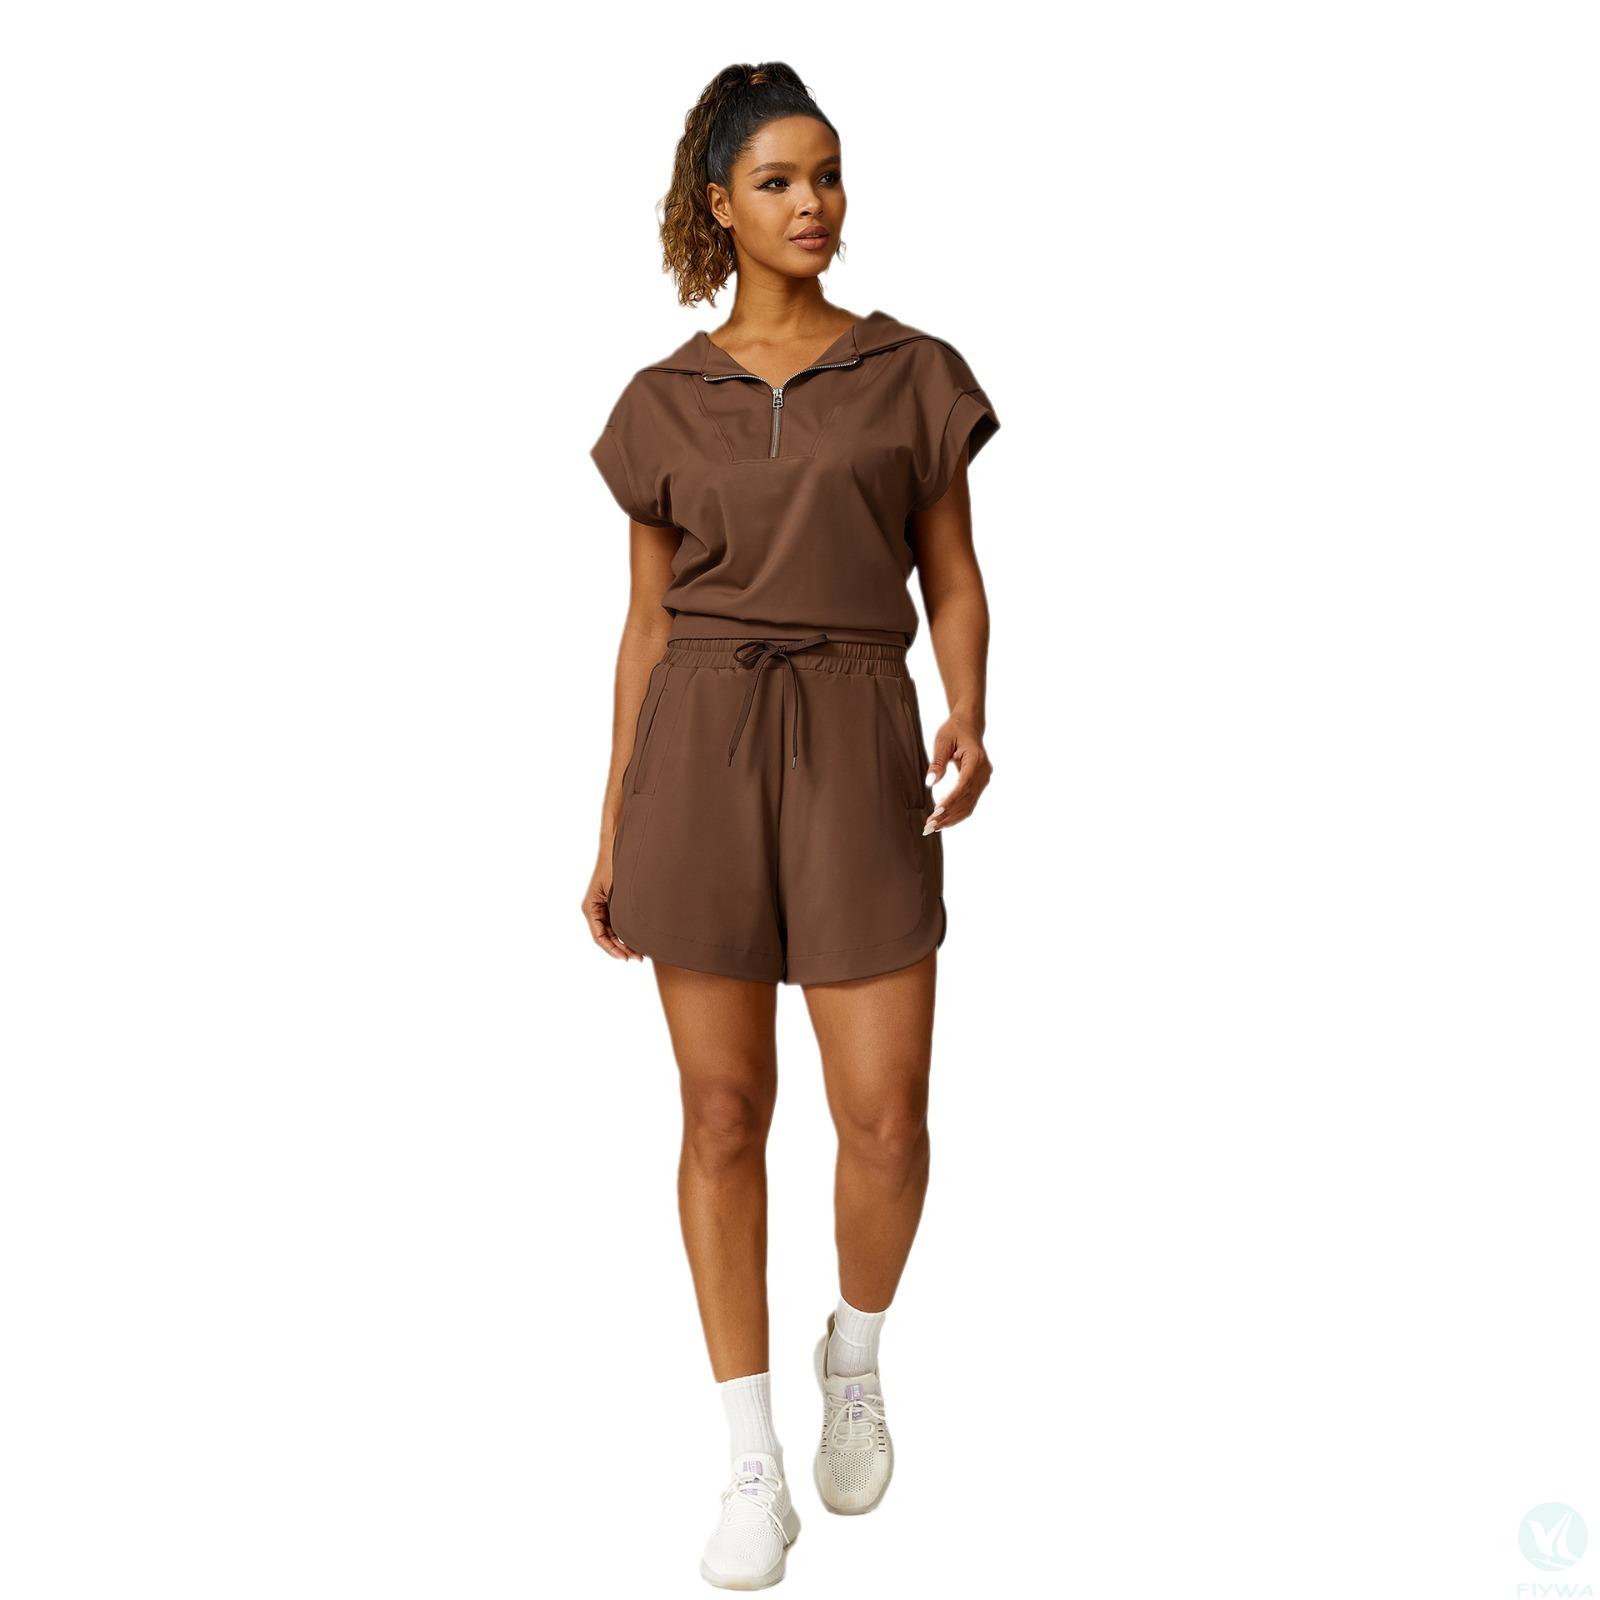 Loose half-zip lapel sleeveless top, casual trousers, lace-up shorts three-piece fitness suit FLY-LM-008 - copy